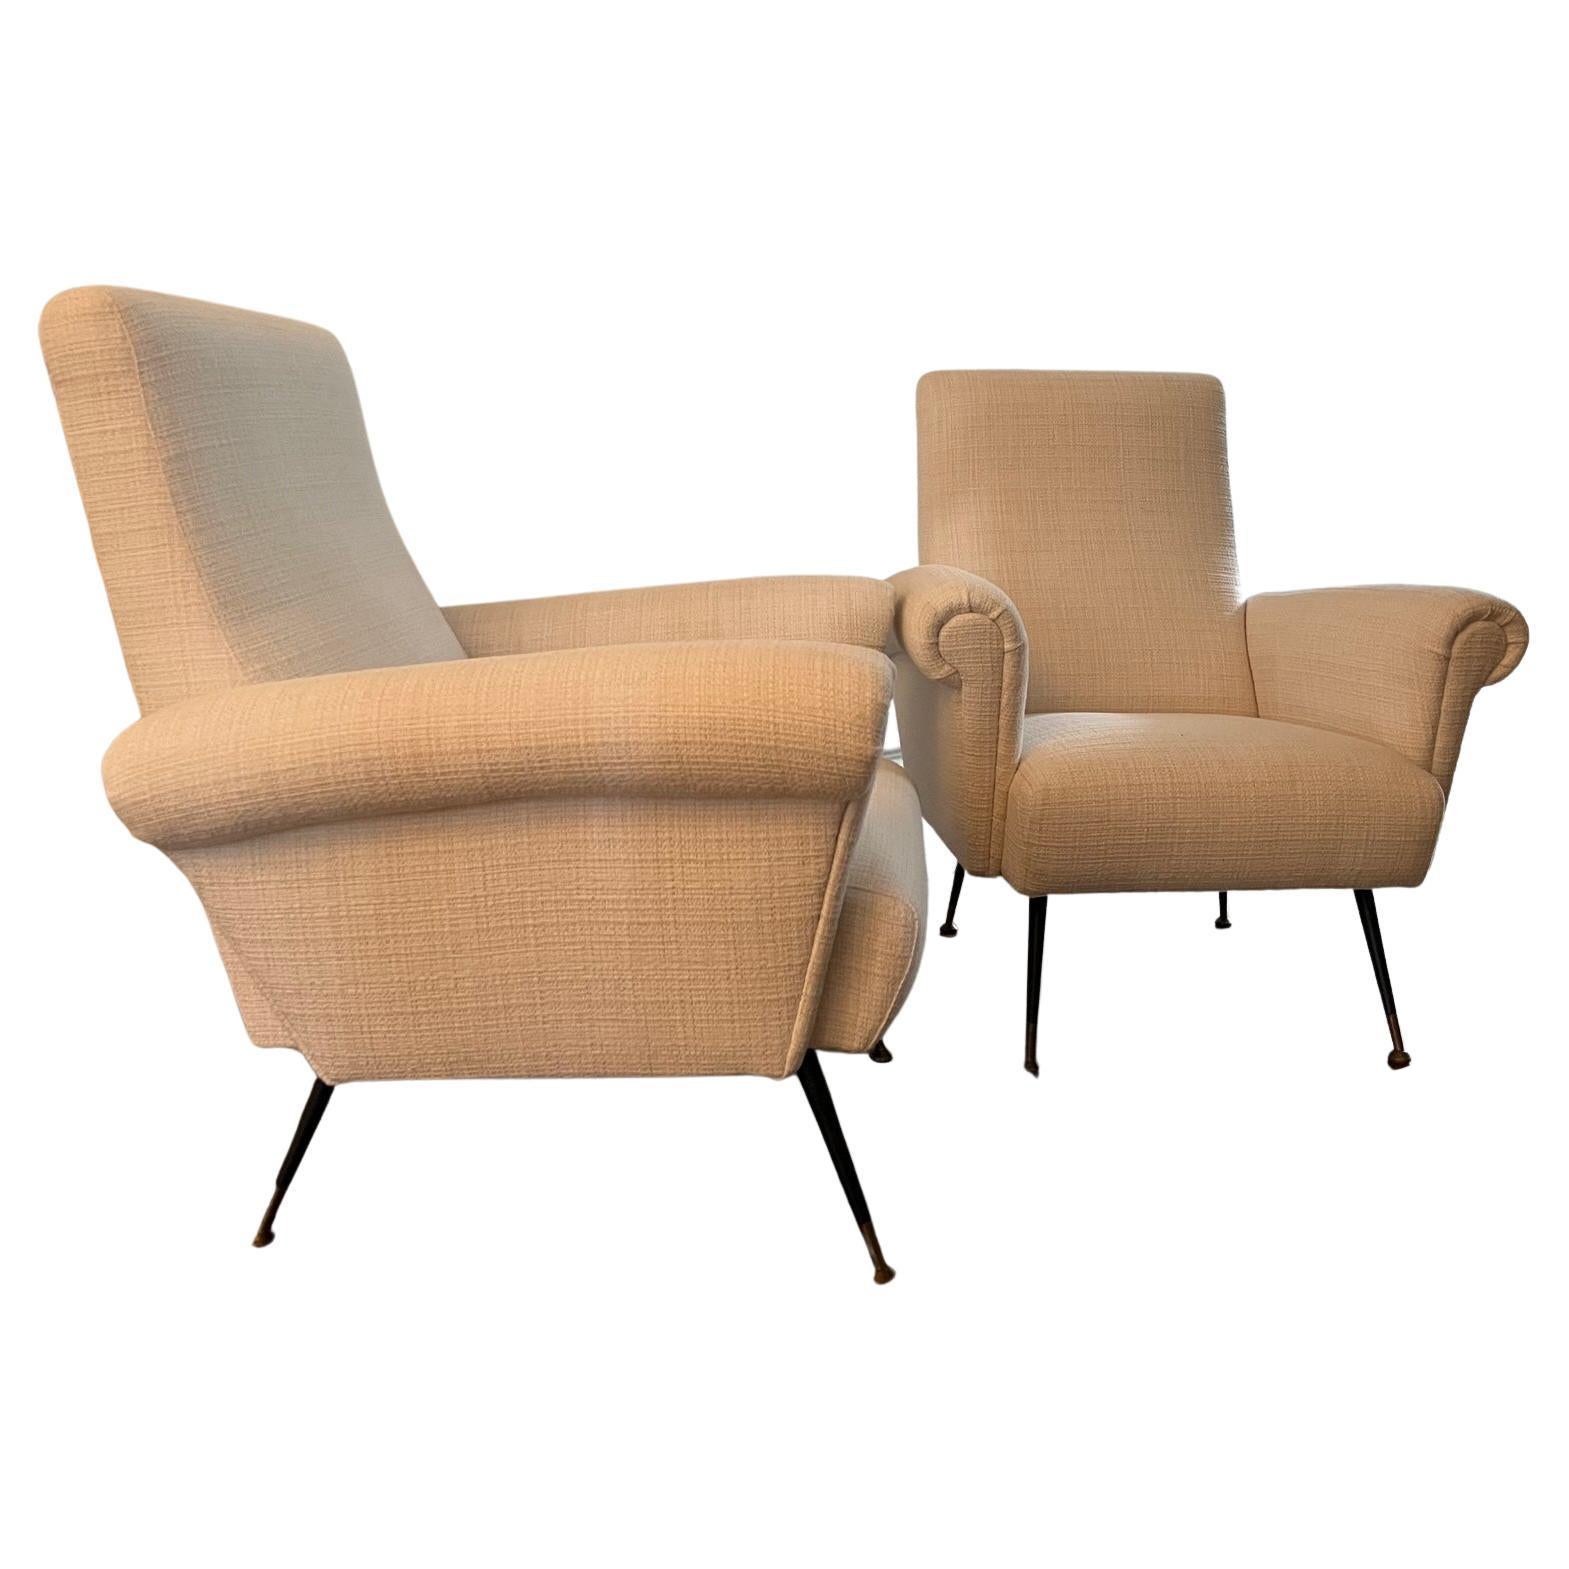 Armchairs New Cream Textured Performance Upholstery For Sale